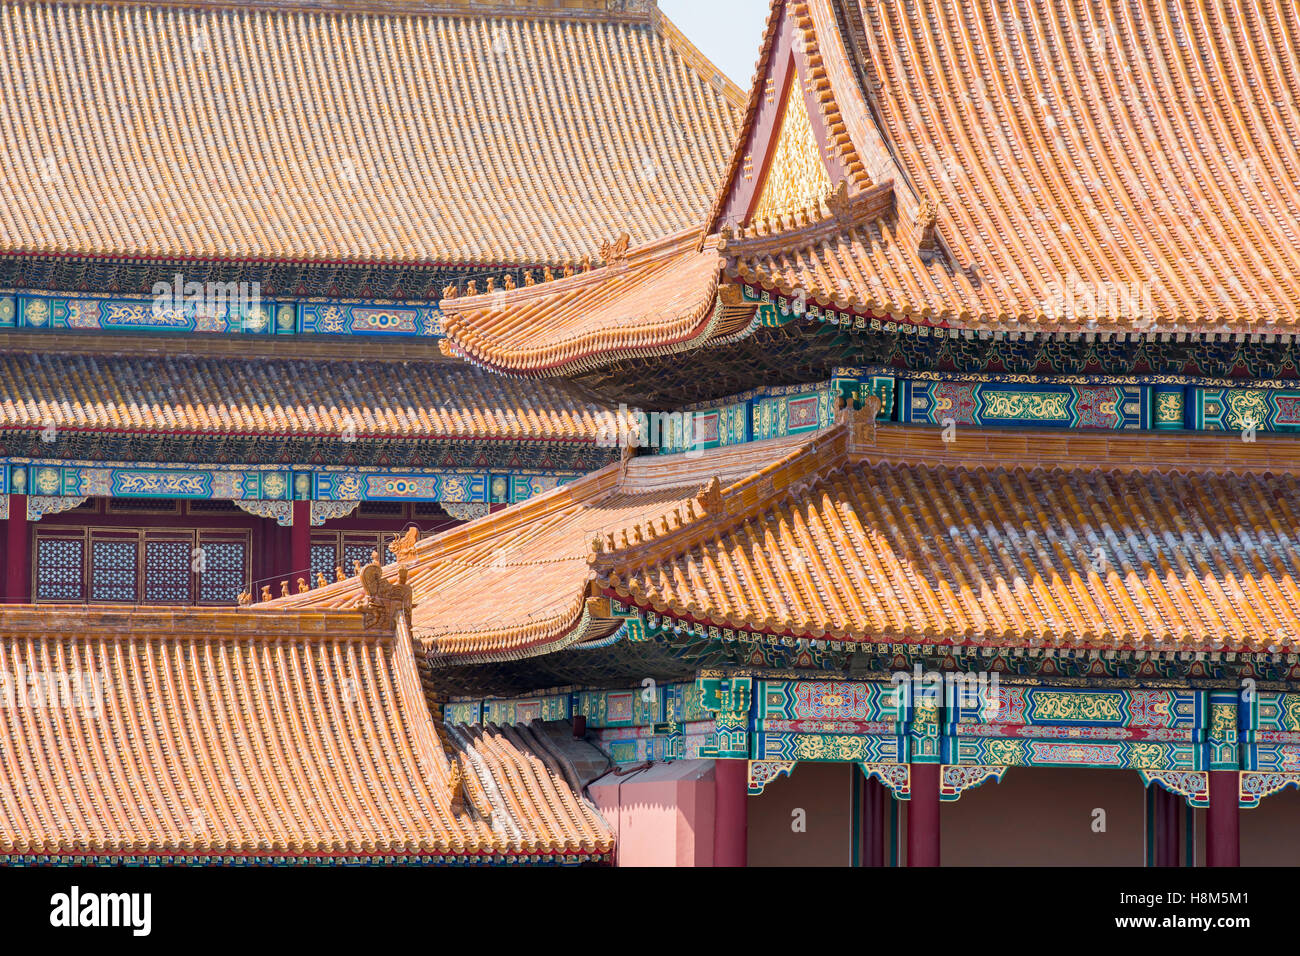 Beijing China - Detail of the ornamented roof and architecture of the Palace Museum located in the Forbidden City. Stock Photo